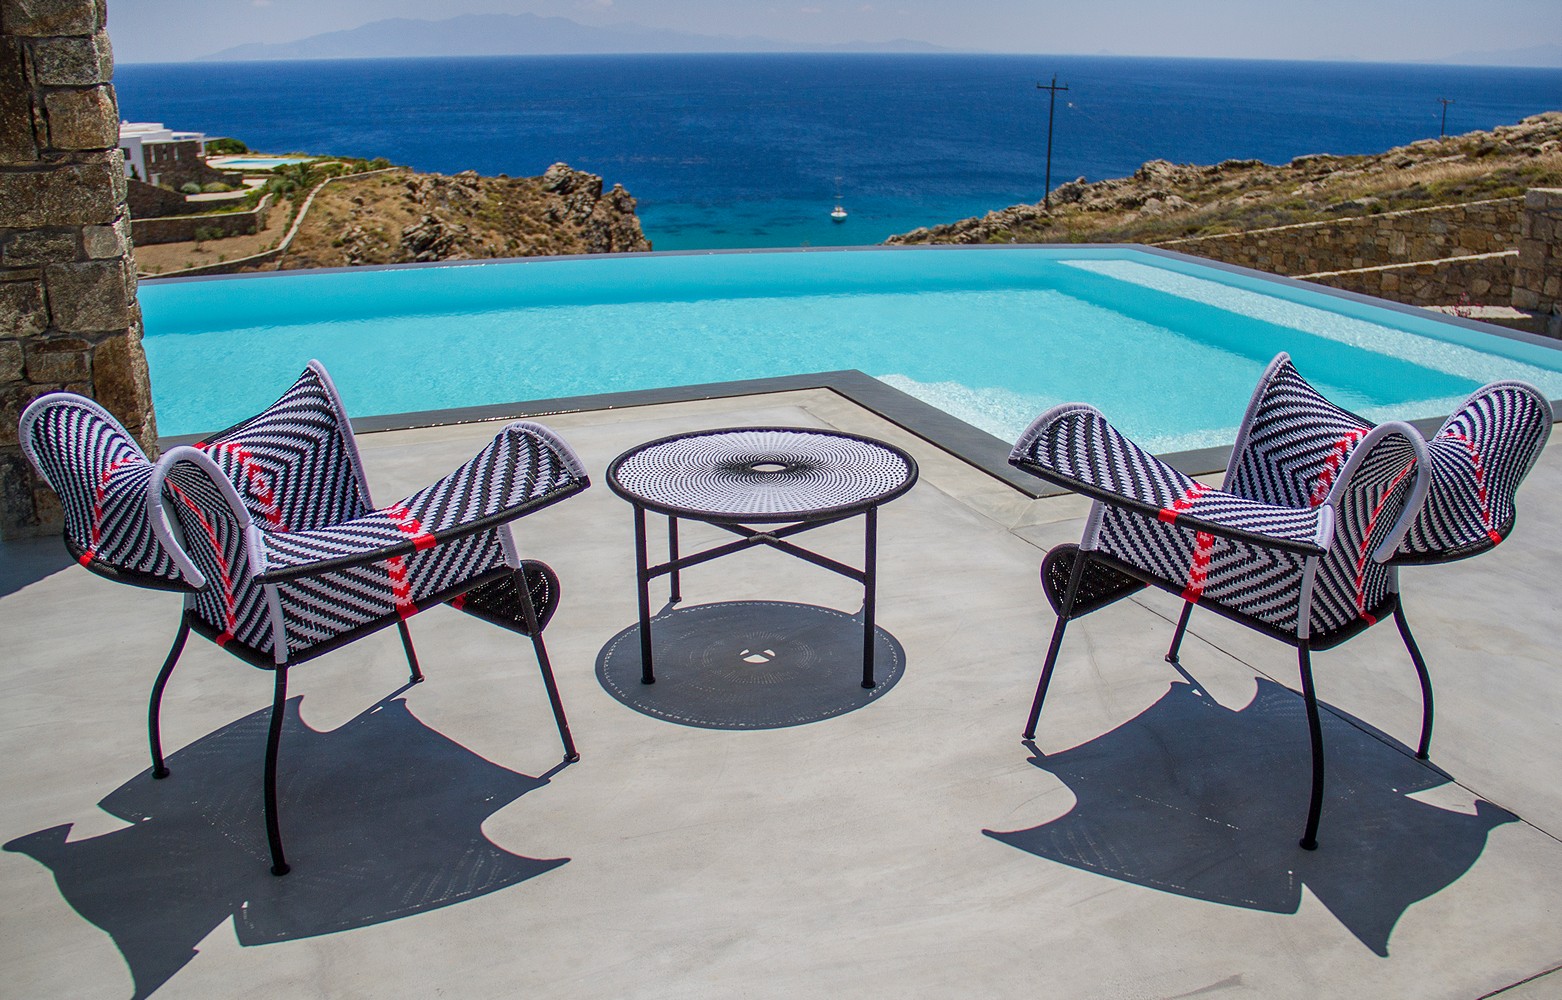 View from a private Mykonos villa with a pool